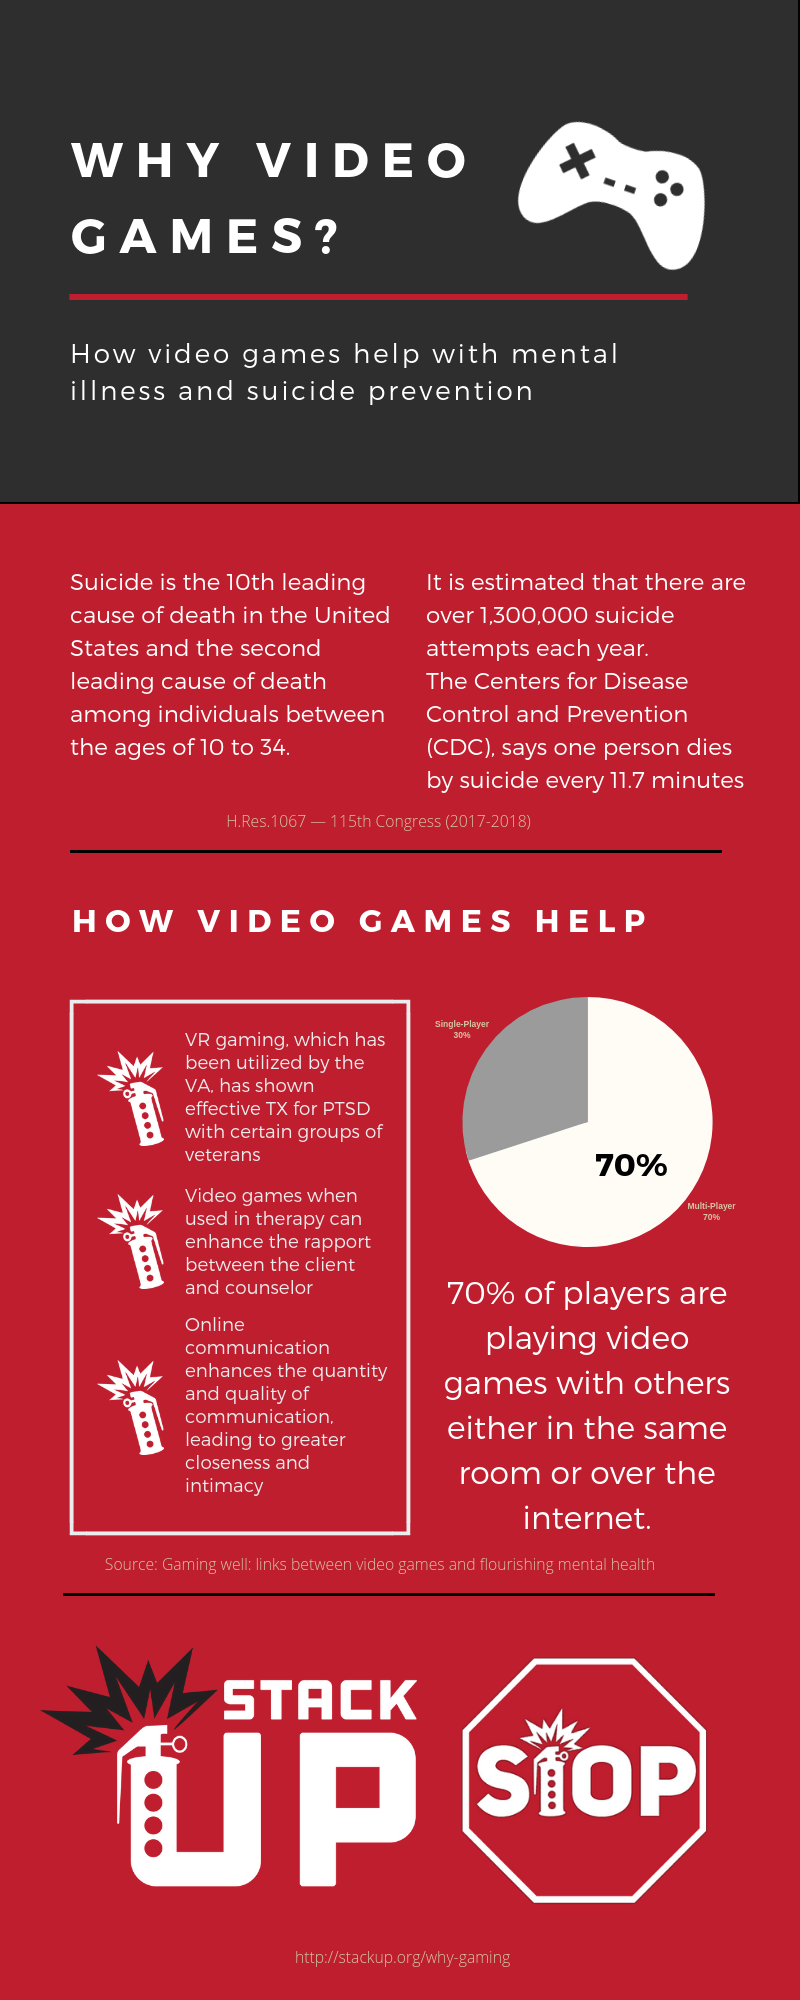 Mental Gaming Red Logo - Why Video Games?